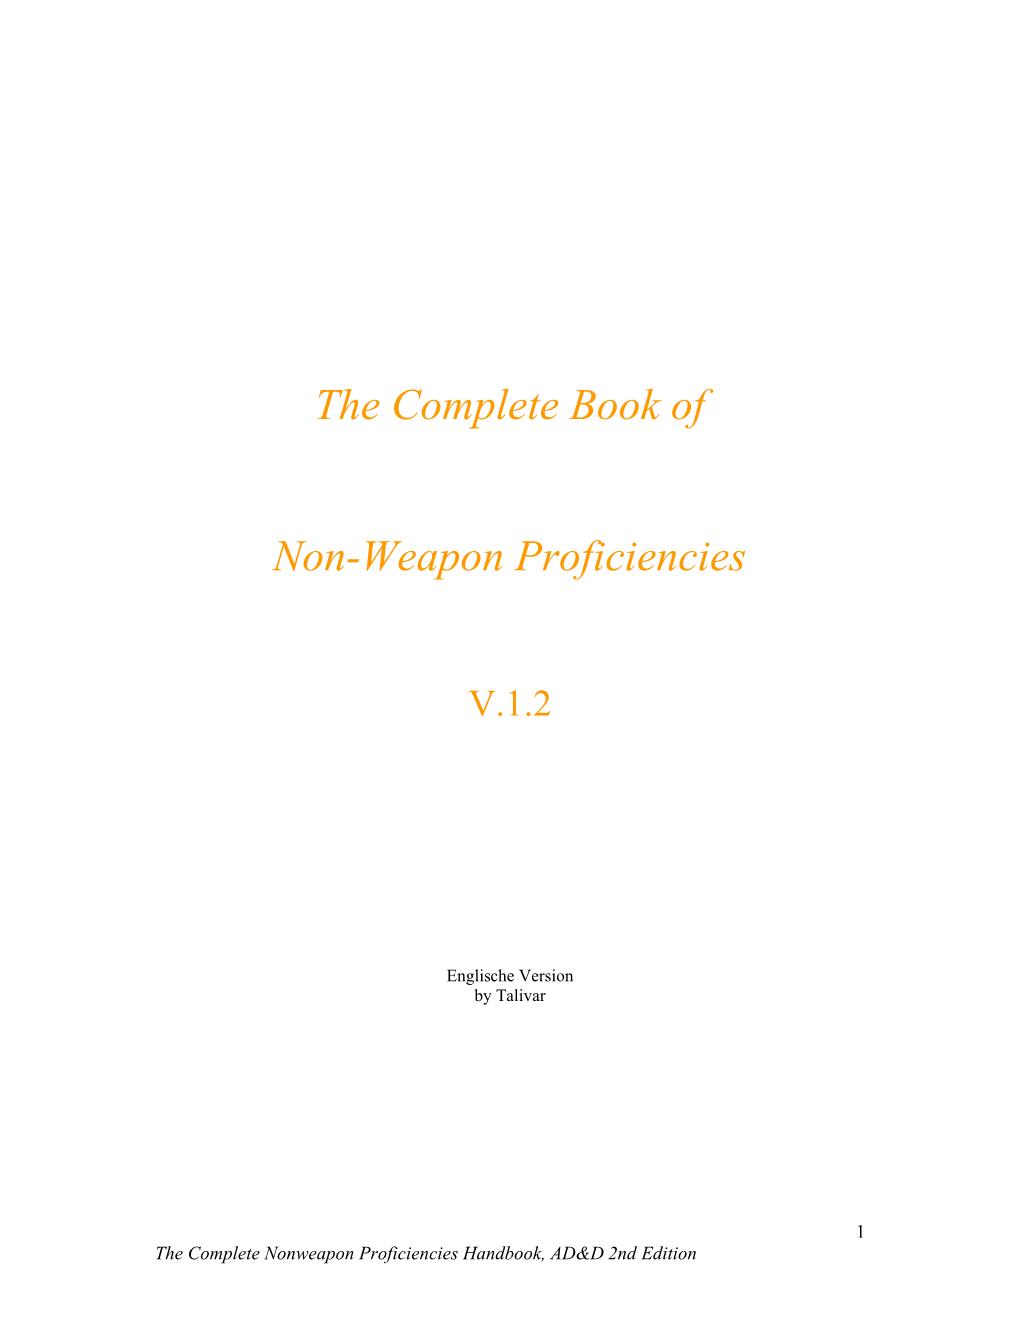 The Complete Book of Non-Weapon Proficiencies